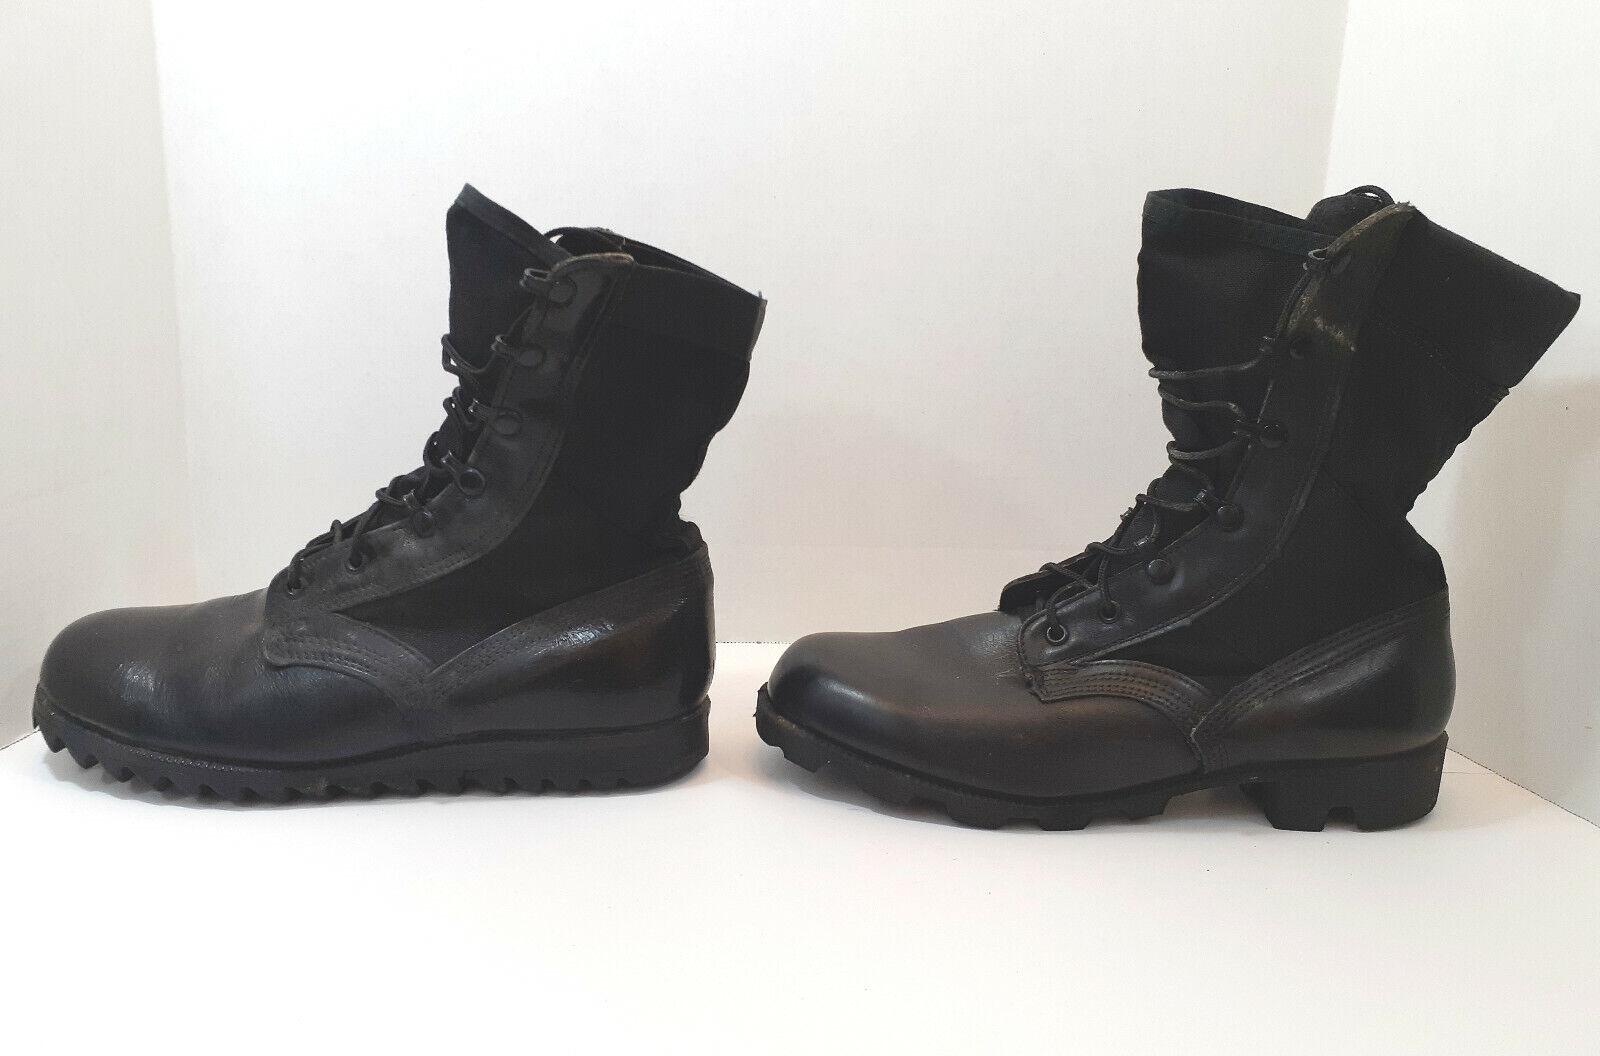 Vintage Ro-Search Mens Combat Boots 8.5 W Black 2 Styles LEFT FOOD ONLY Amputee